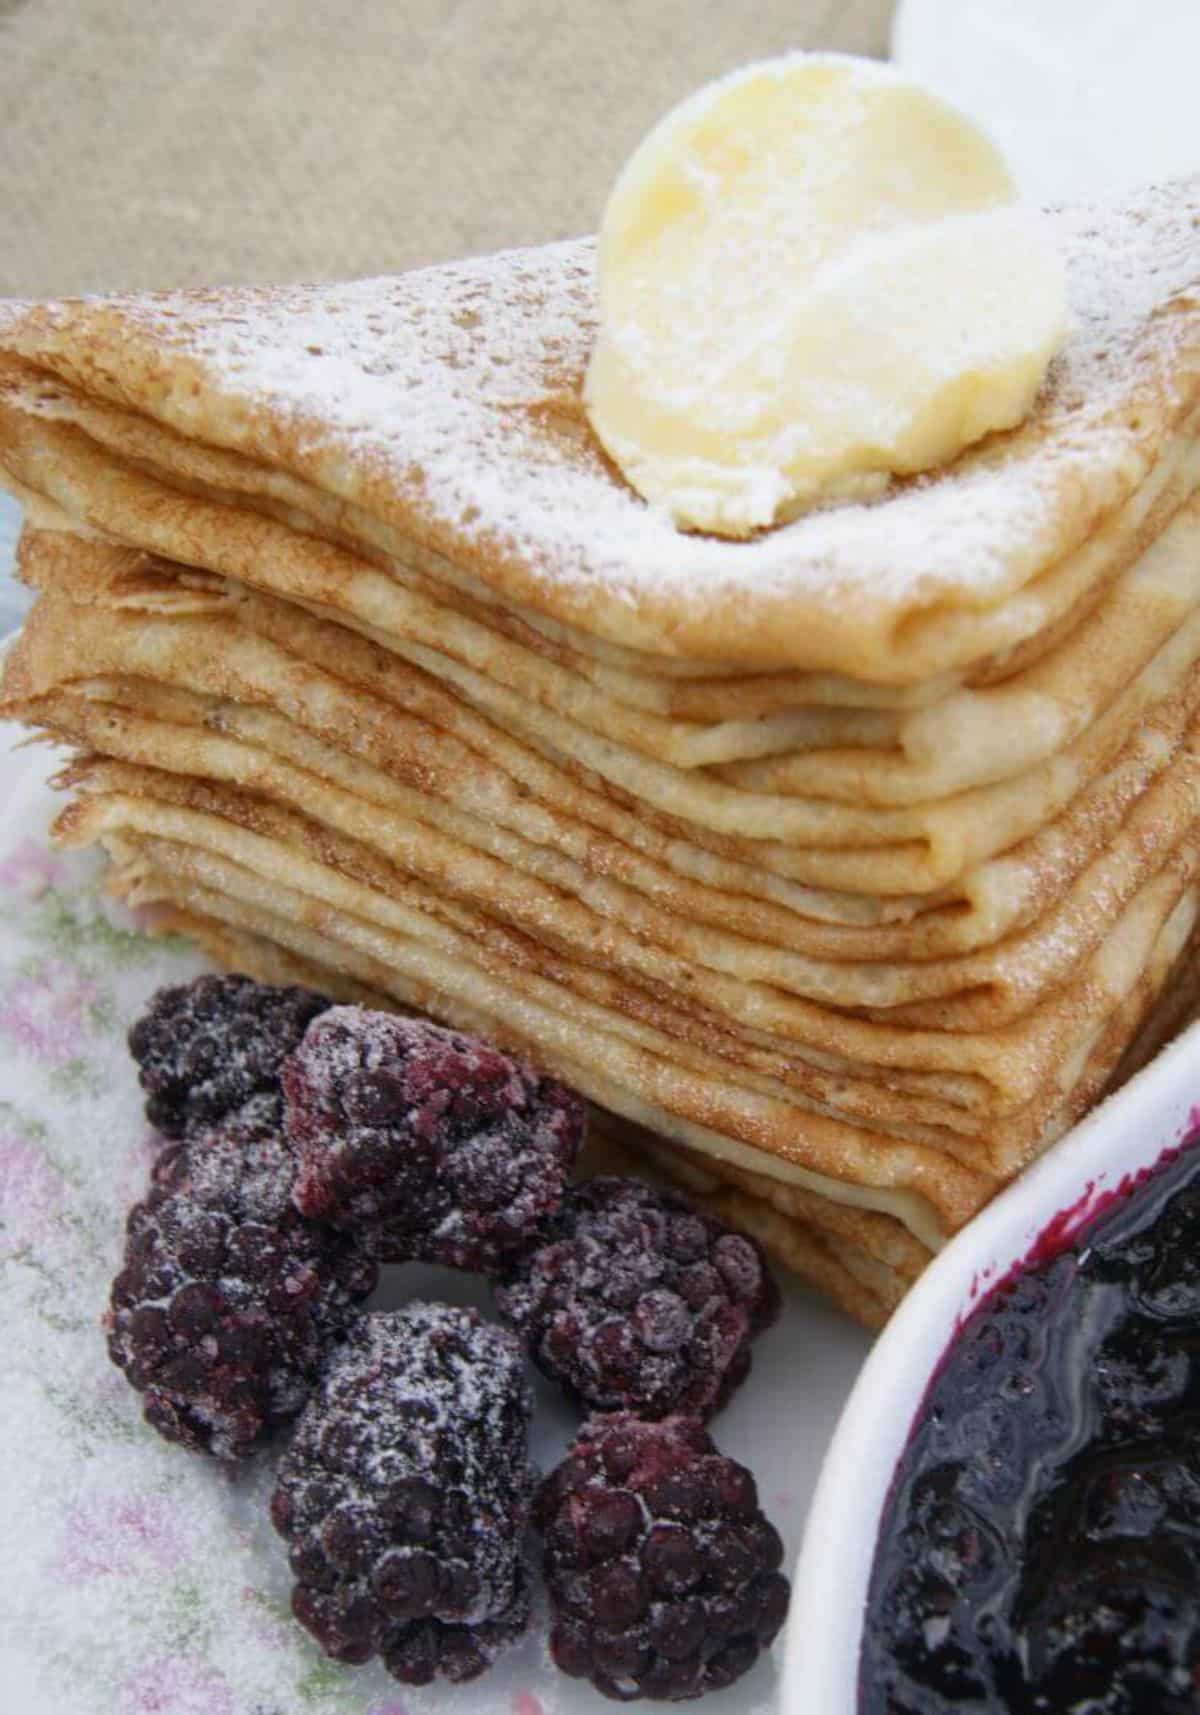 A pile of French Crepes with raspberries.